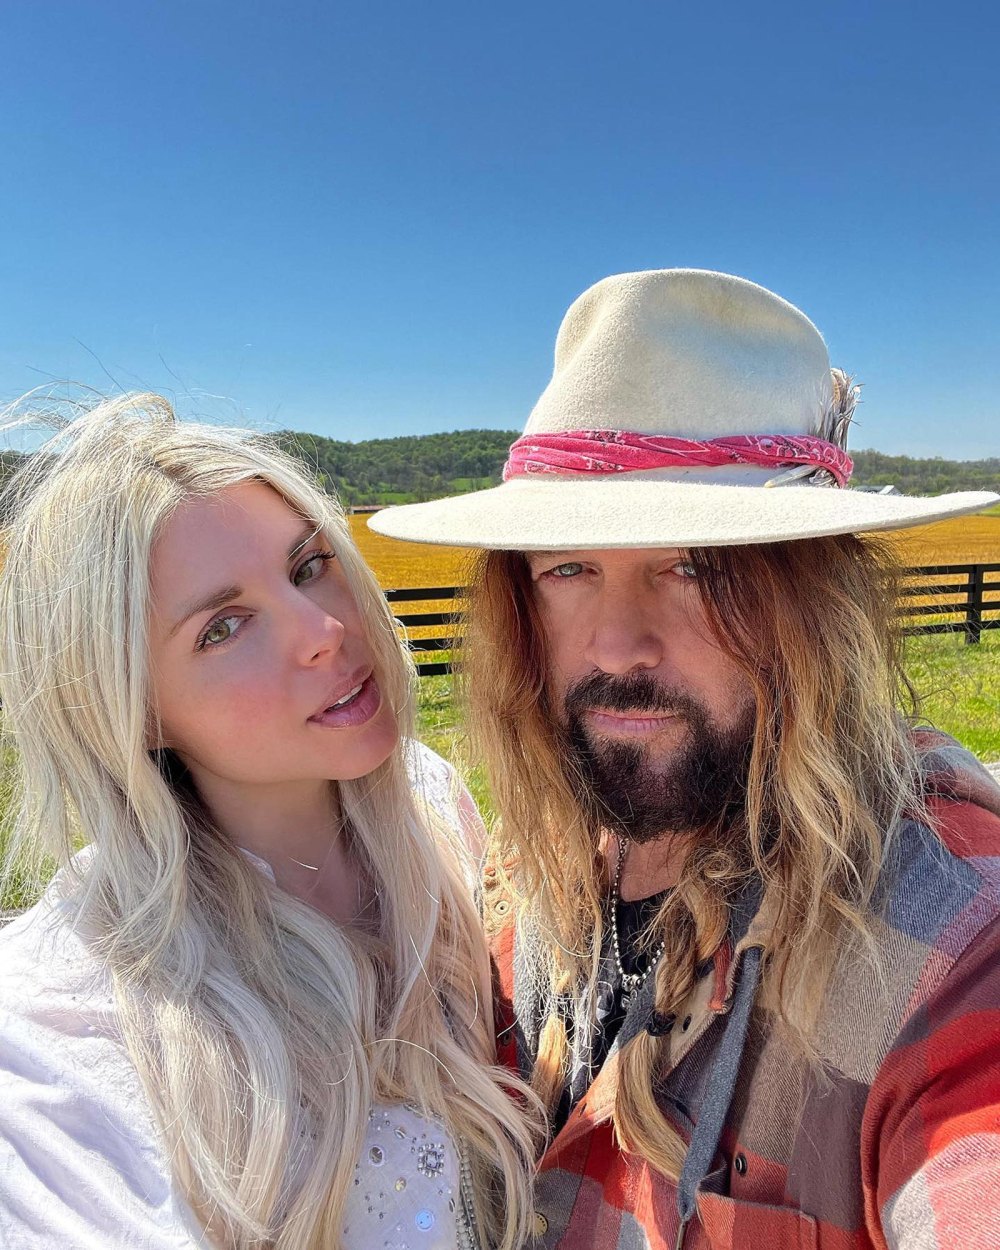 Billy Ray Cyrus Shares His Firerose Wife's Emotional and Physical Abuse